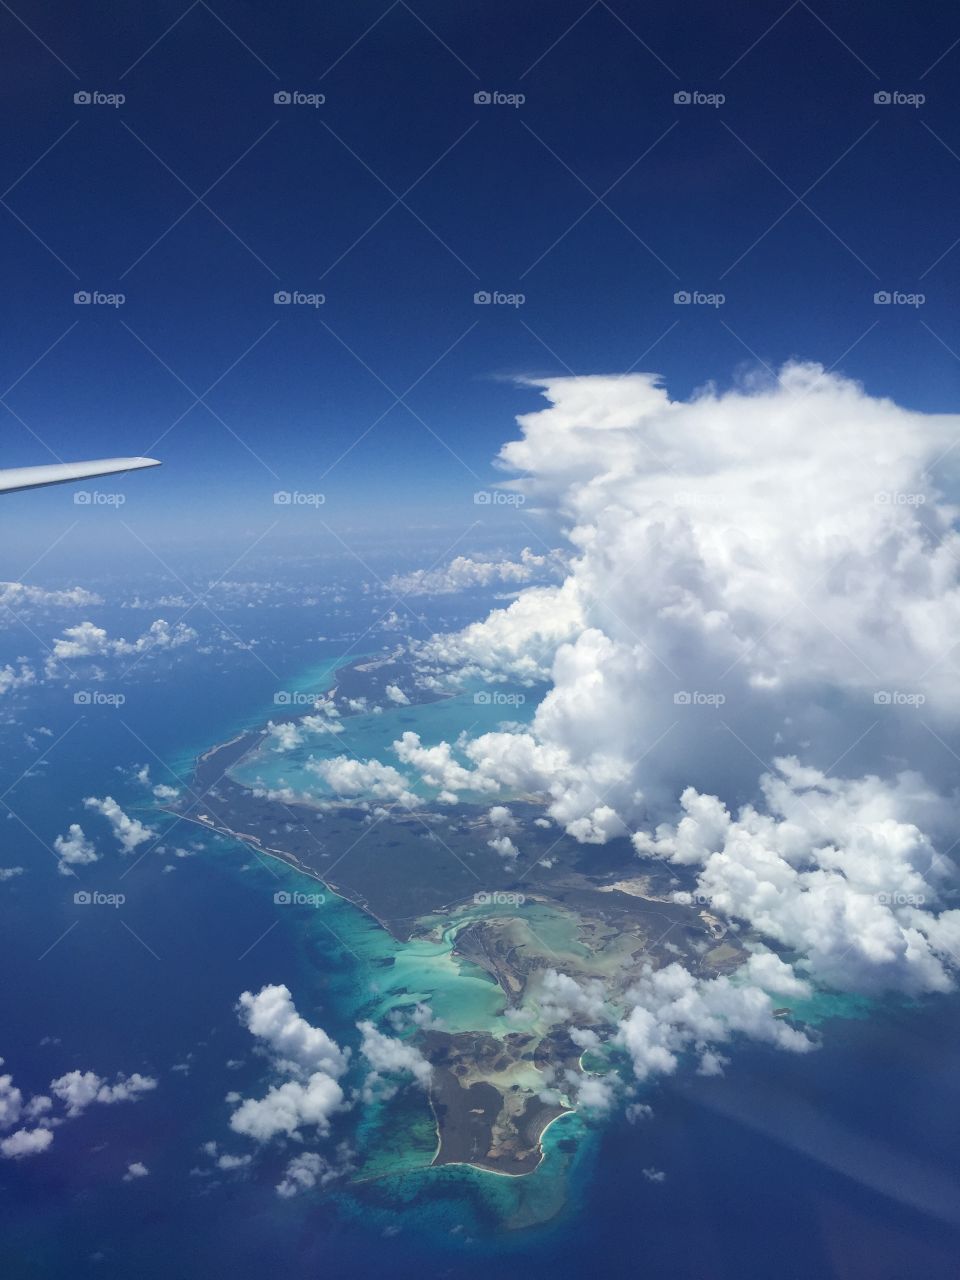 Somewhere over the Caribbean 